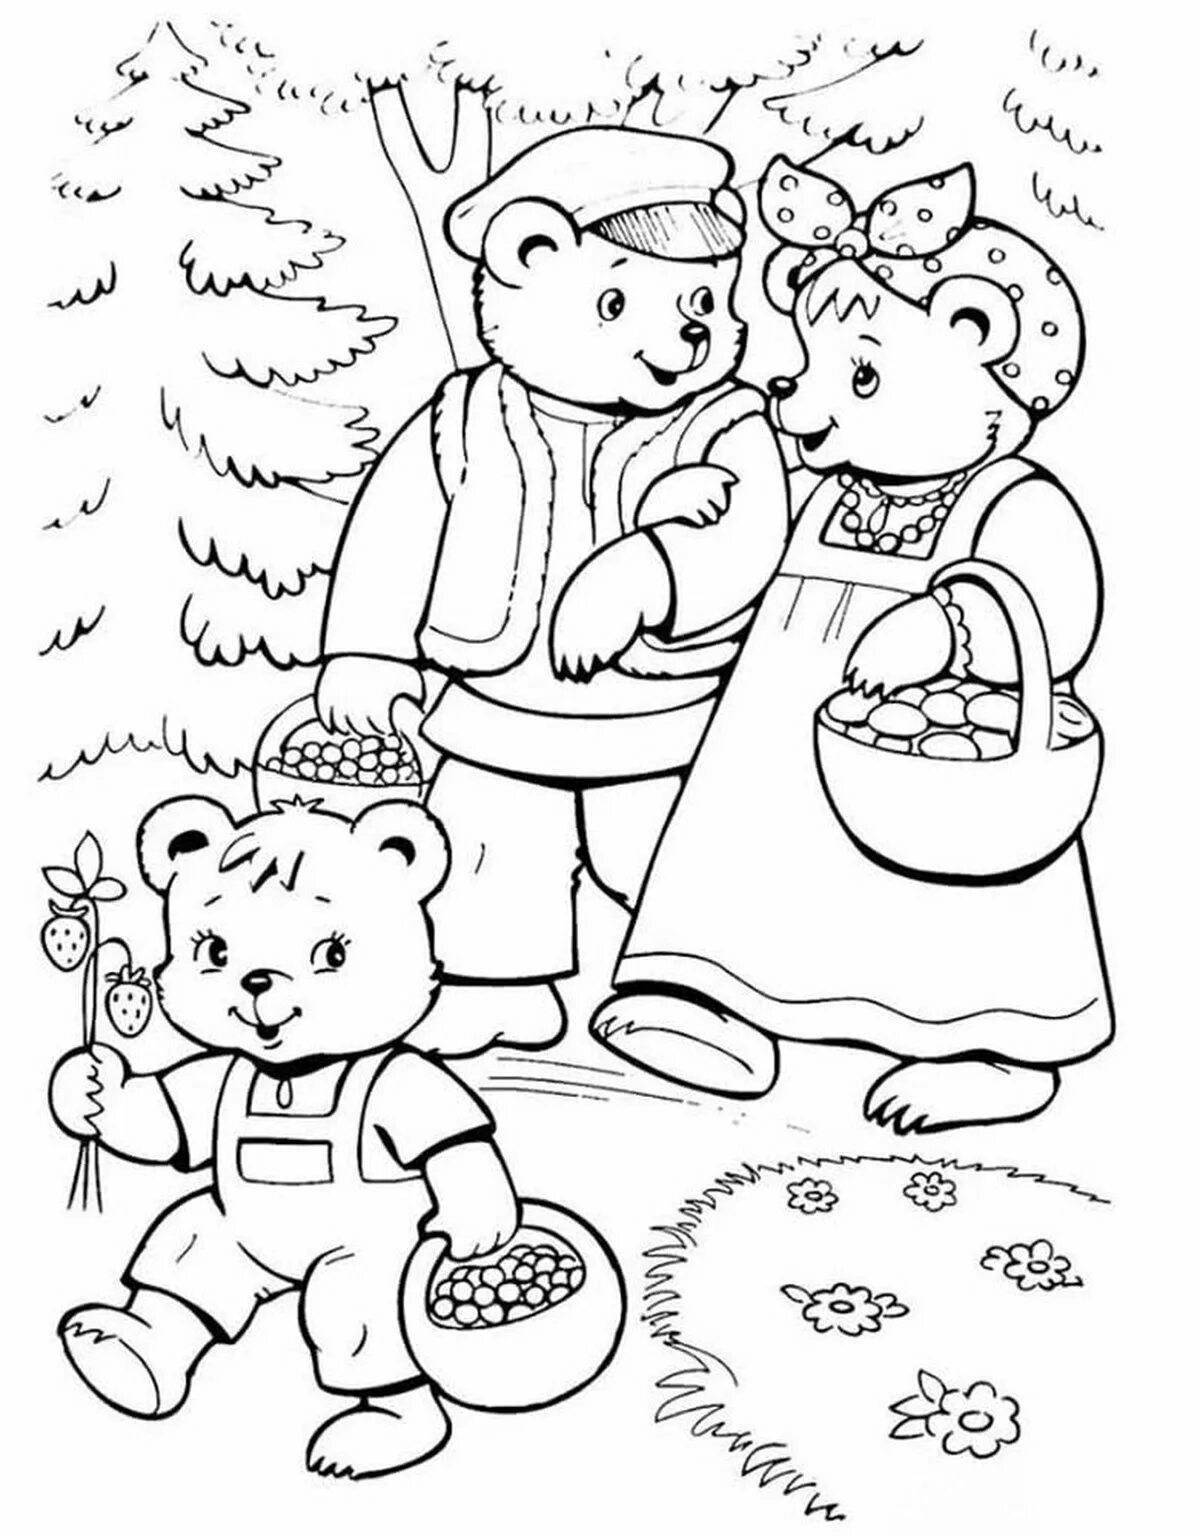 Incredible fairy tale coloring pages for preschoolers